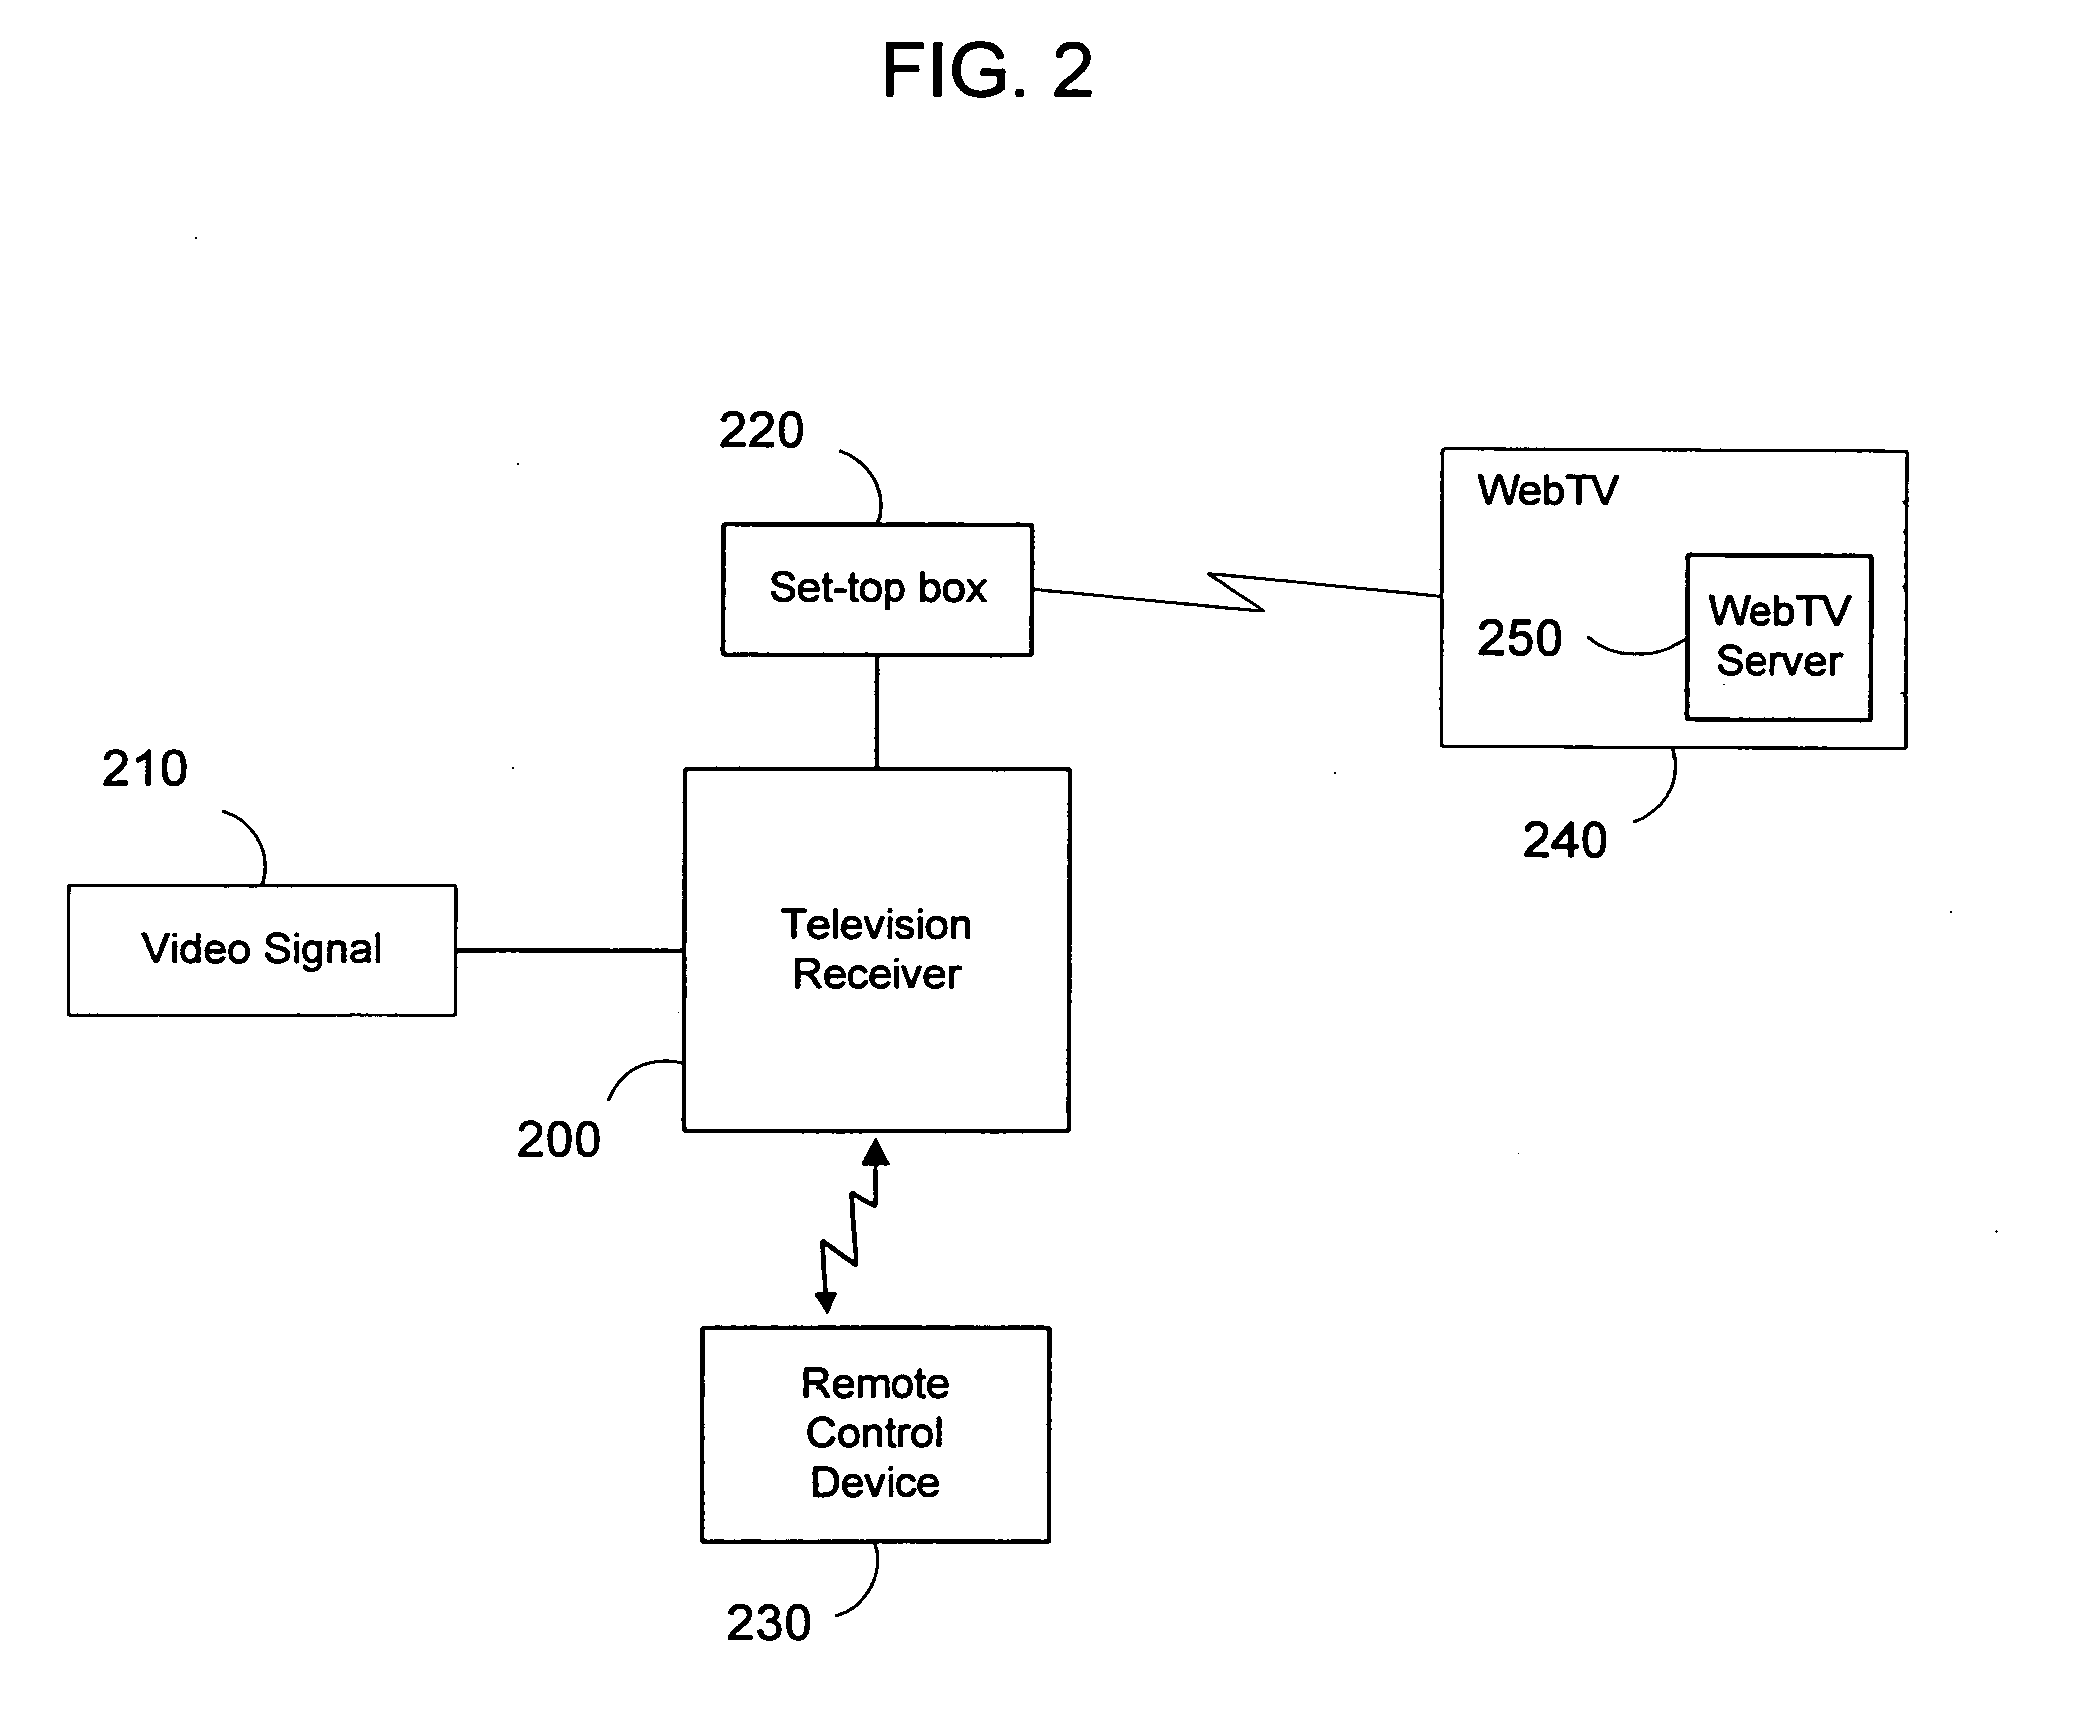 Methods and apparatus for transmitting prioritized electronic mail messages